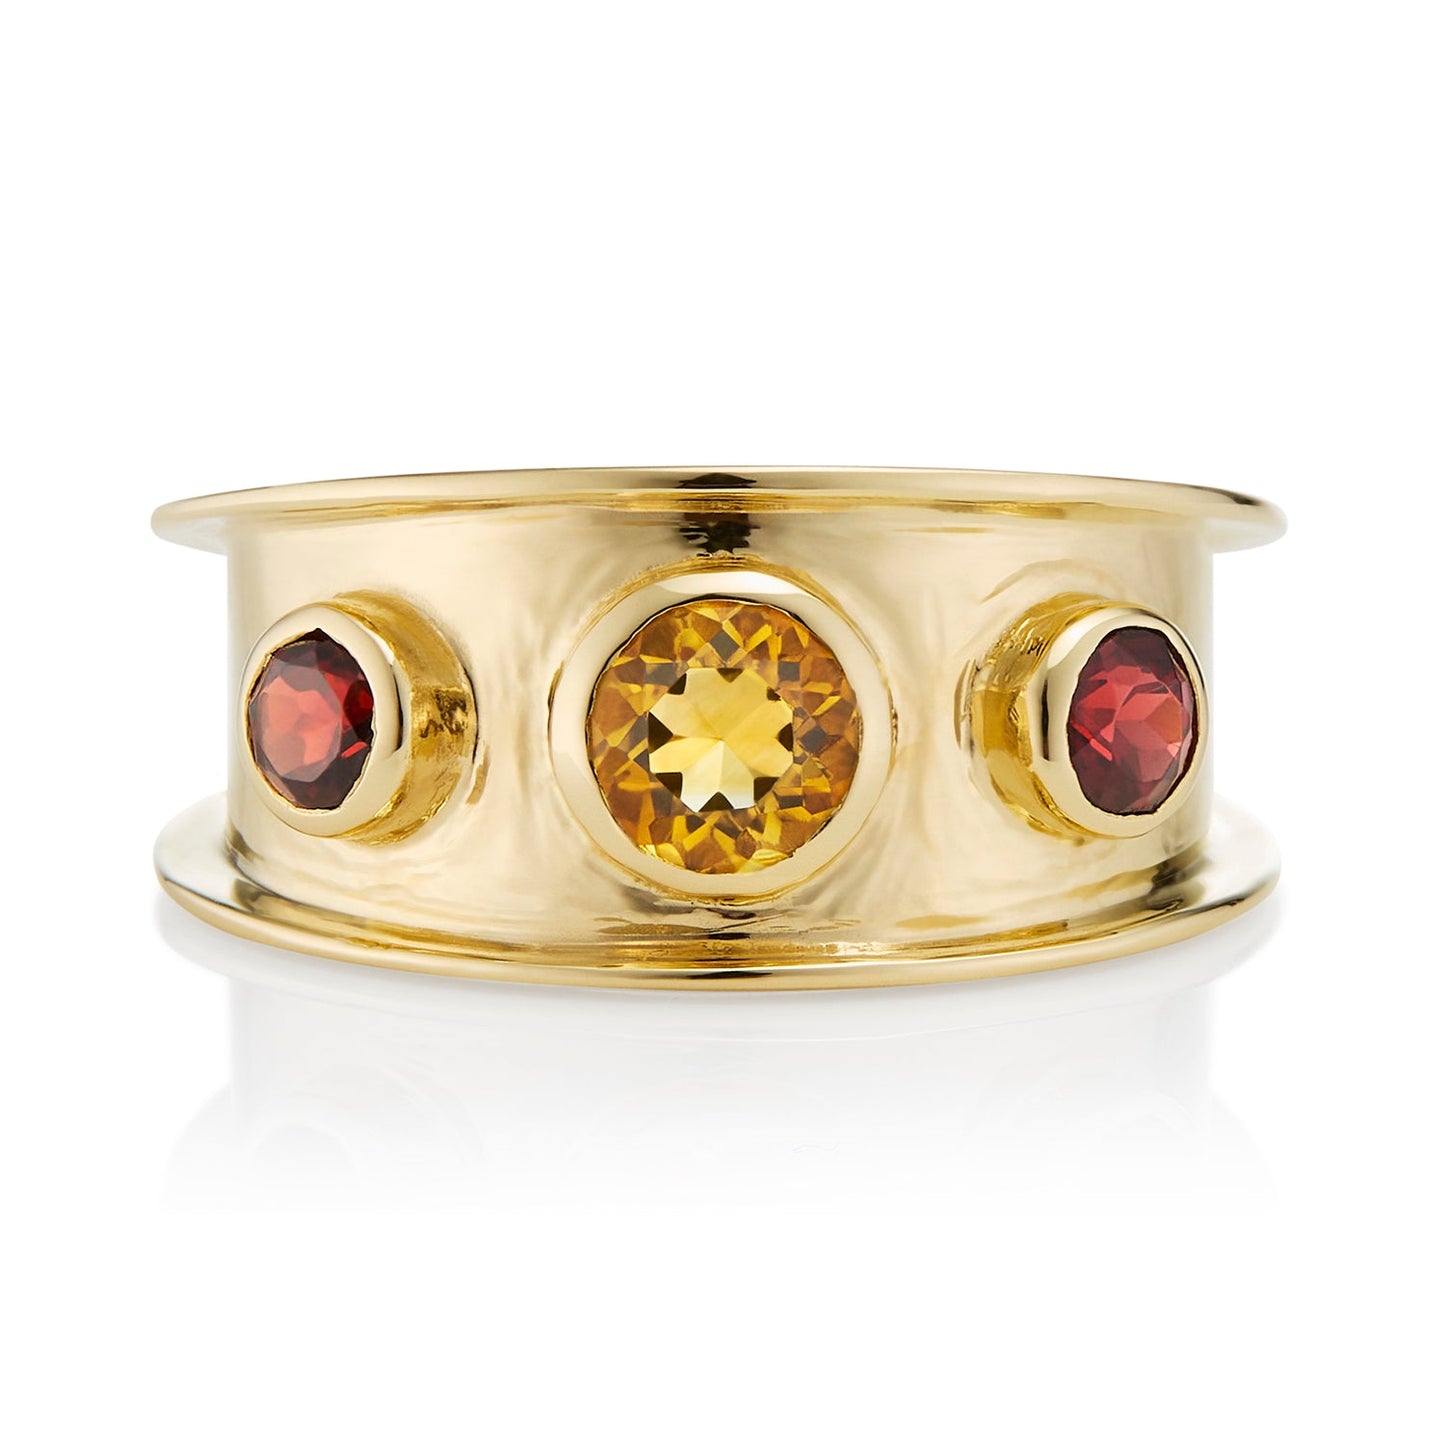 British Jewellers designed London-made custom gold jewellery -Gold Statement Ring in Citrine and Garnet – Andalusian Collection, Augustine Jewellery, British Jewellers, Gemstone Jewellery, Luxury Jewellery London.